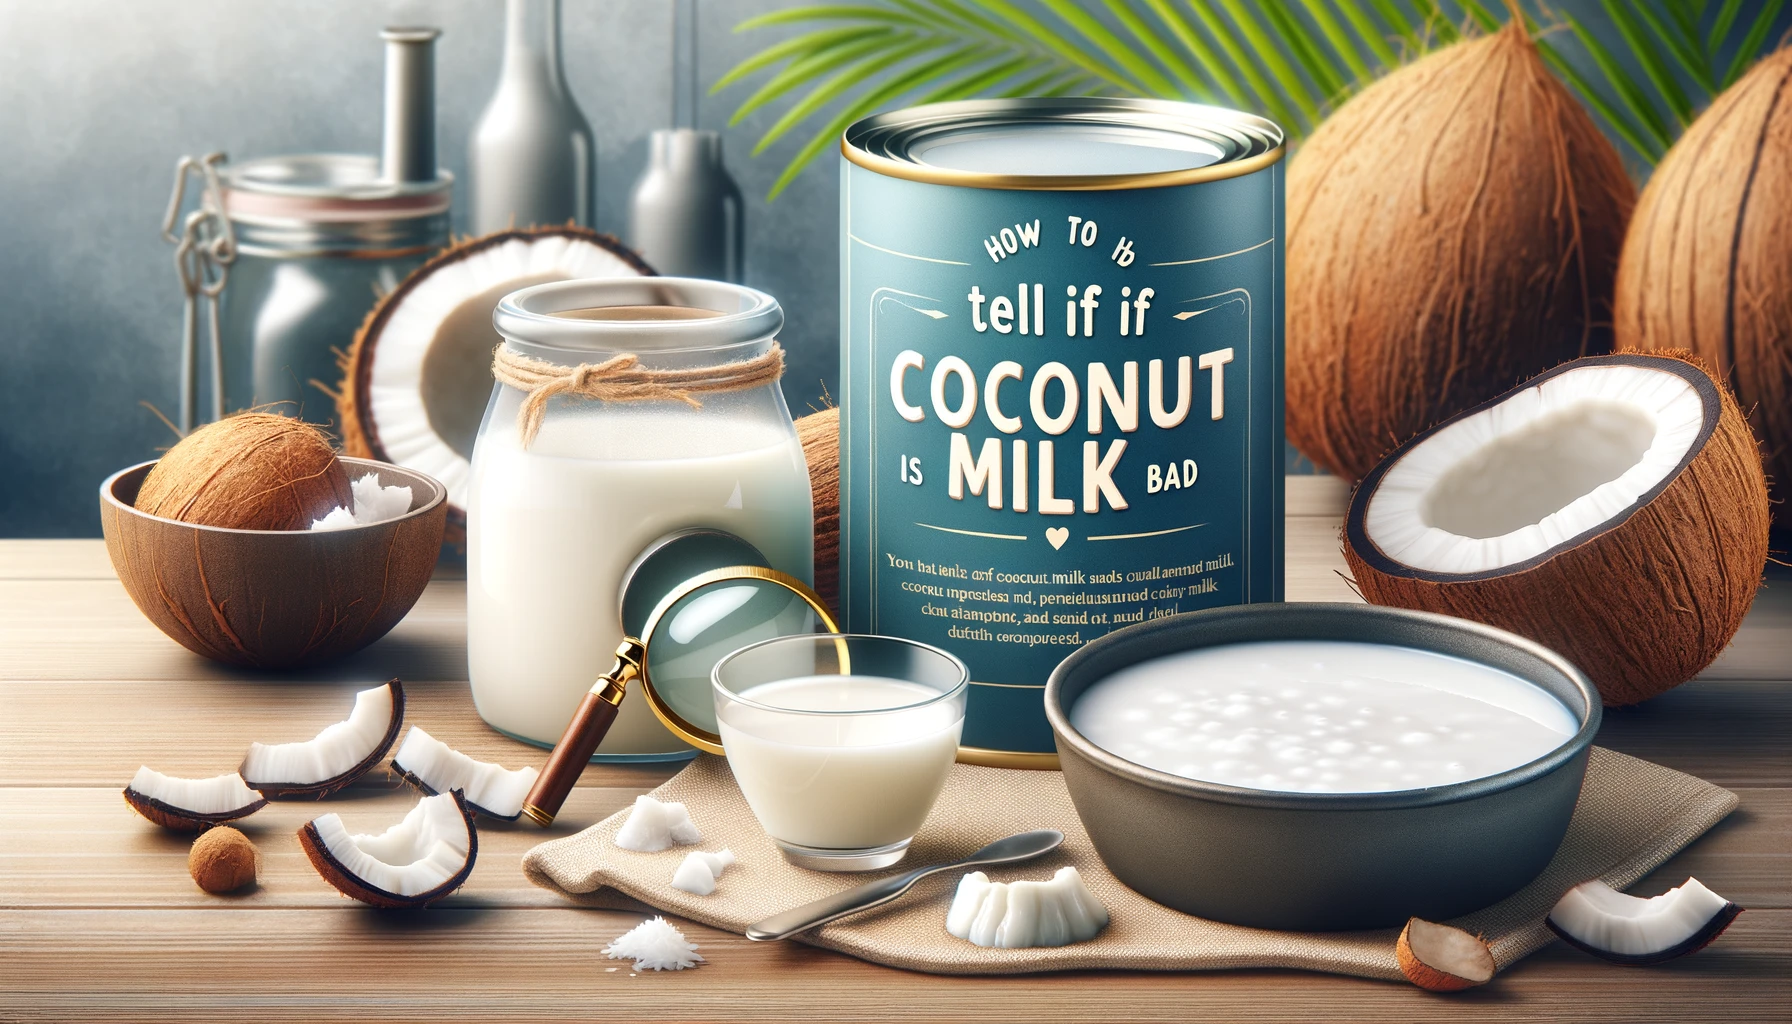 How to Tell if Coconut Milk is Bad